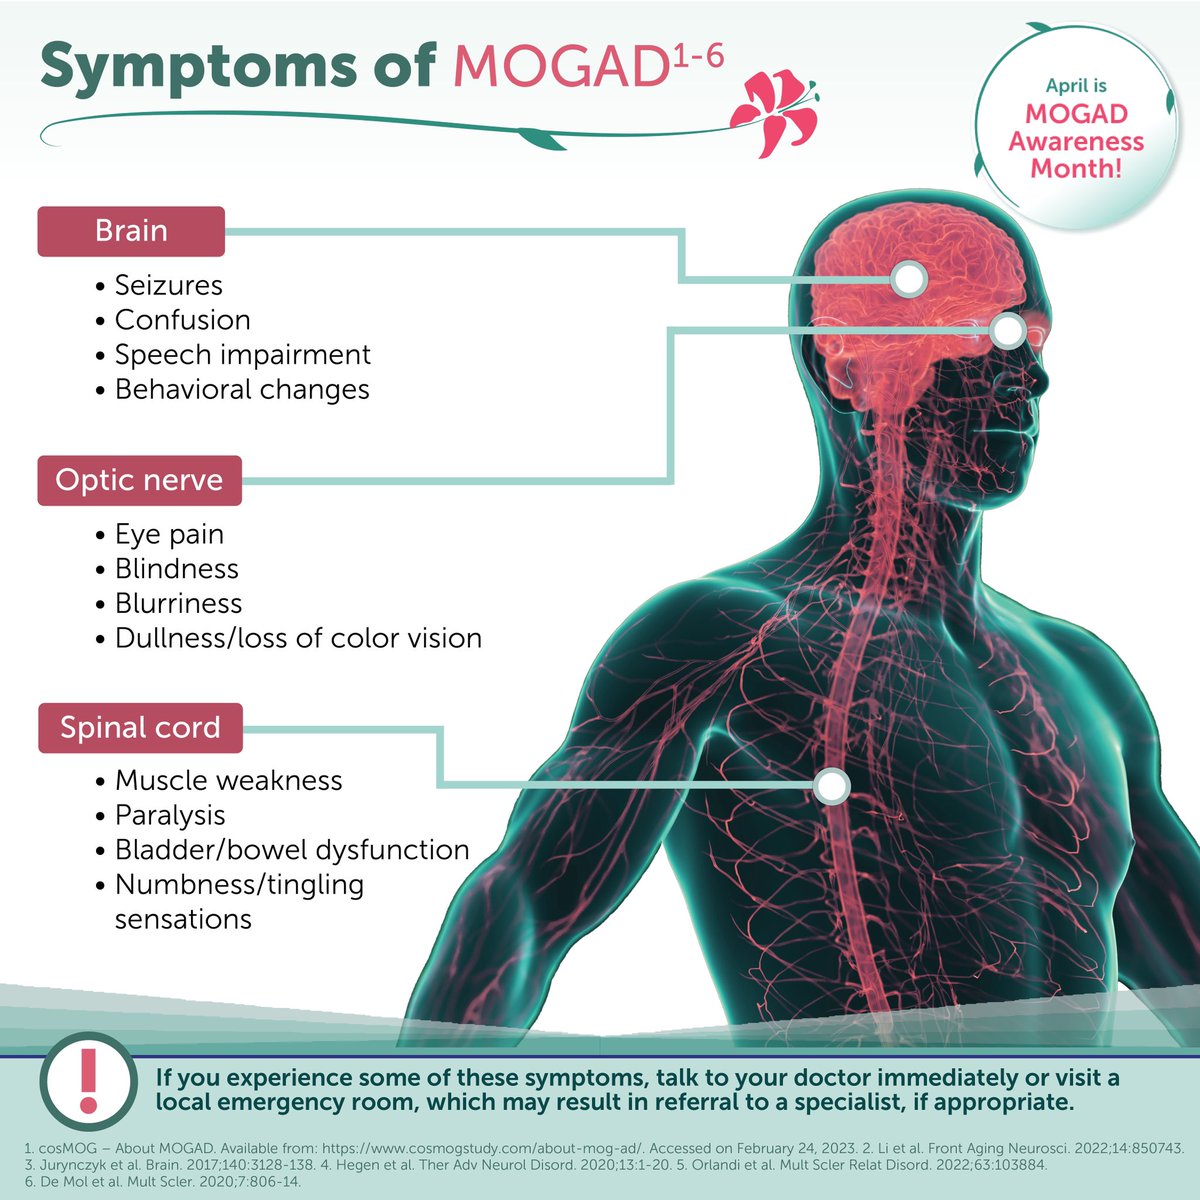 April is MOGAD Awareness Month! #mogadawarenessmonth #MOGAD #raredisease
 
MOGAD is a rare autoimmune disease with 1.6-4.8 per million adults diagnosed yearly. It is characterized by inflammation of the central nervous system – the optic nerve, brain, and/or spinal cord – with…